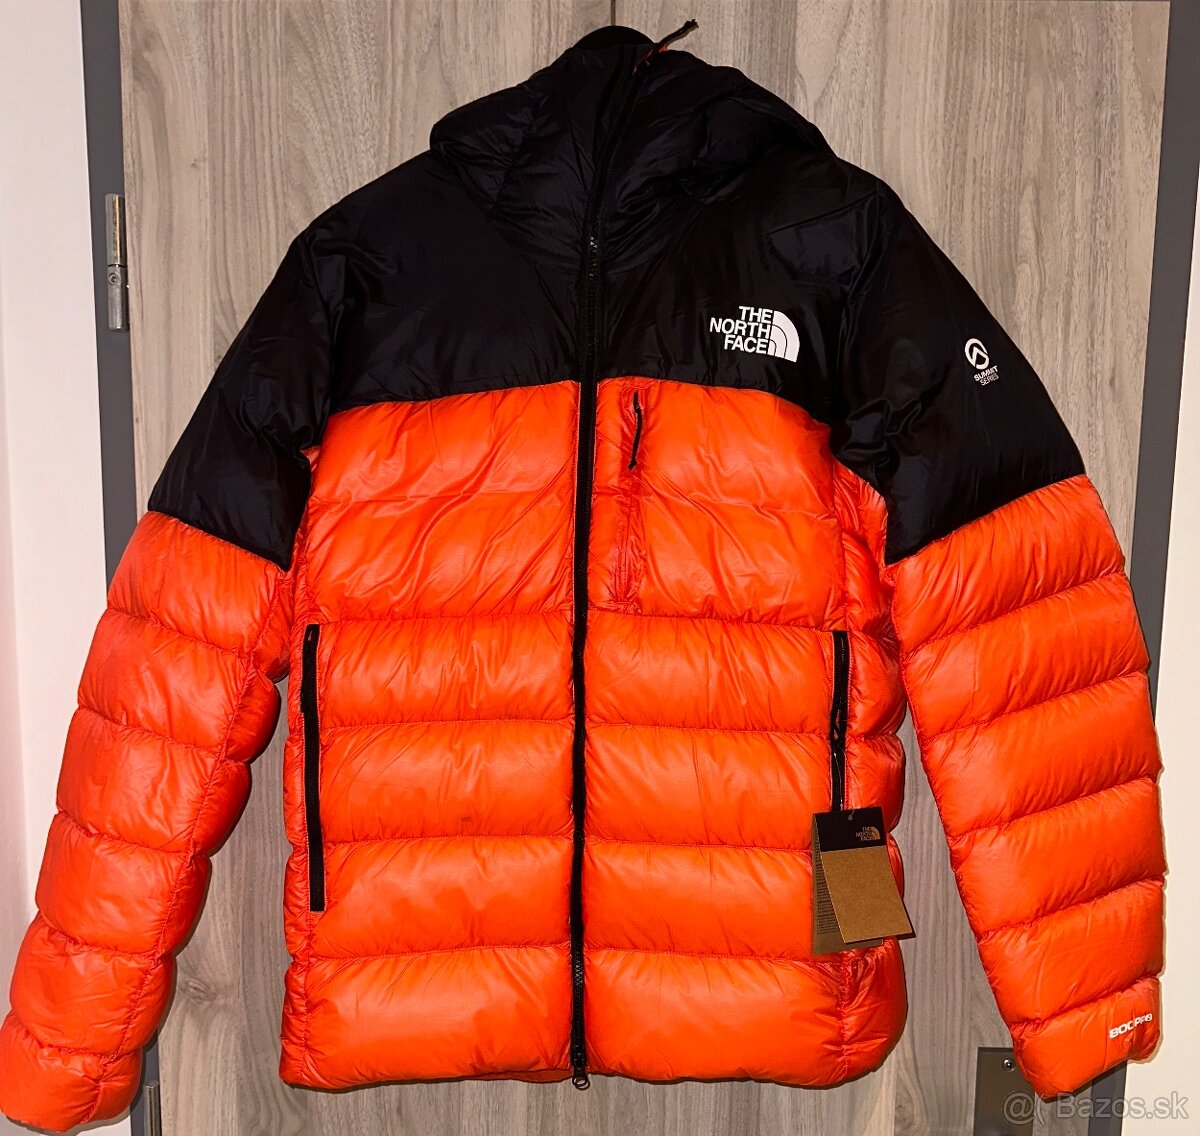 The North Face Summit Series 800 Pro (Parka)